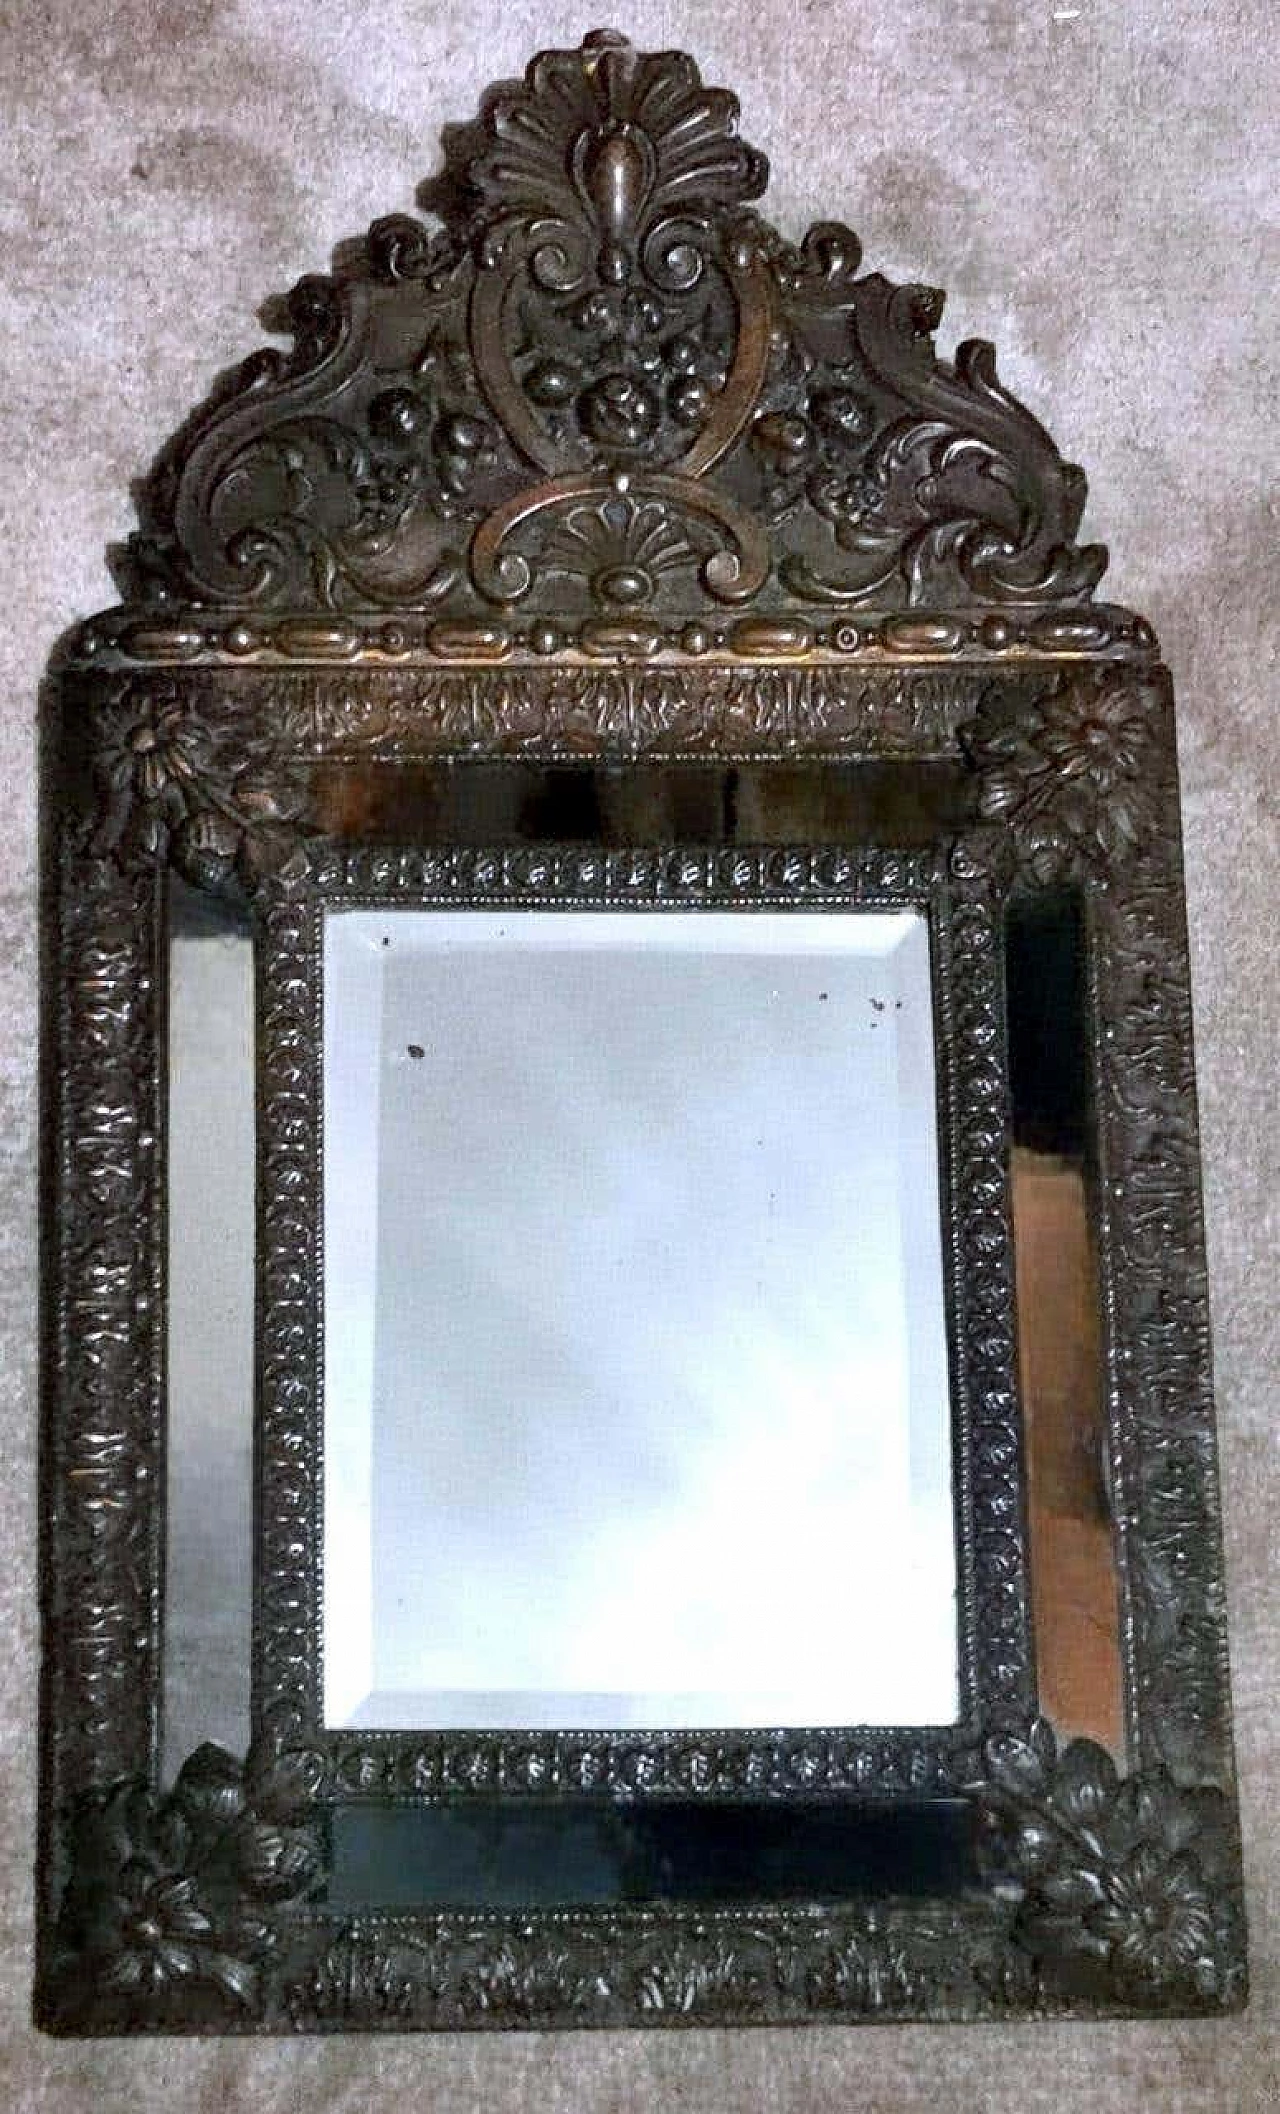 Napoleon III style wall mirror with repoussé work in burnished brass, mid-19th century 1